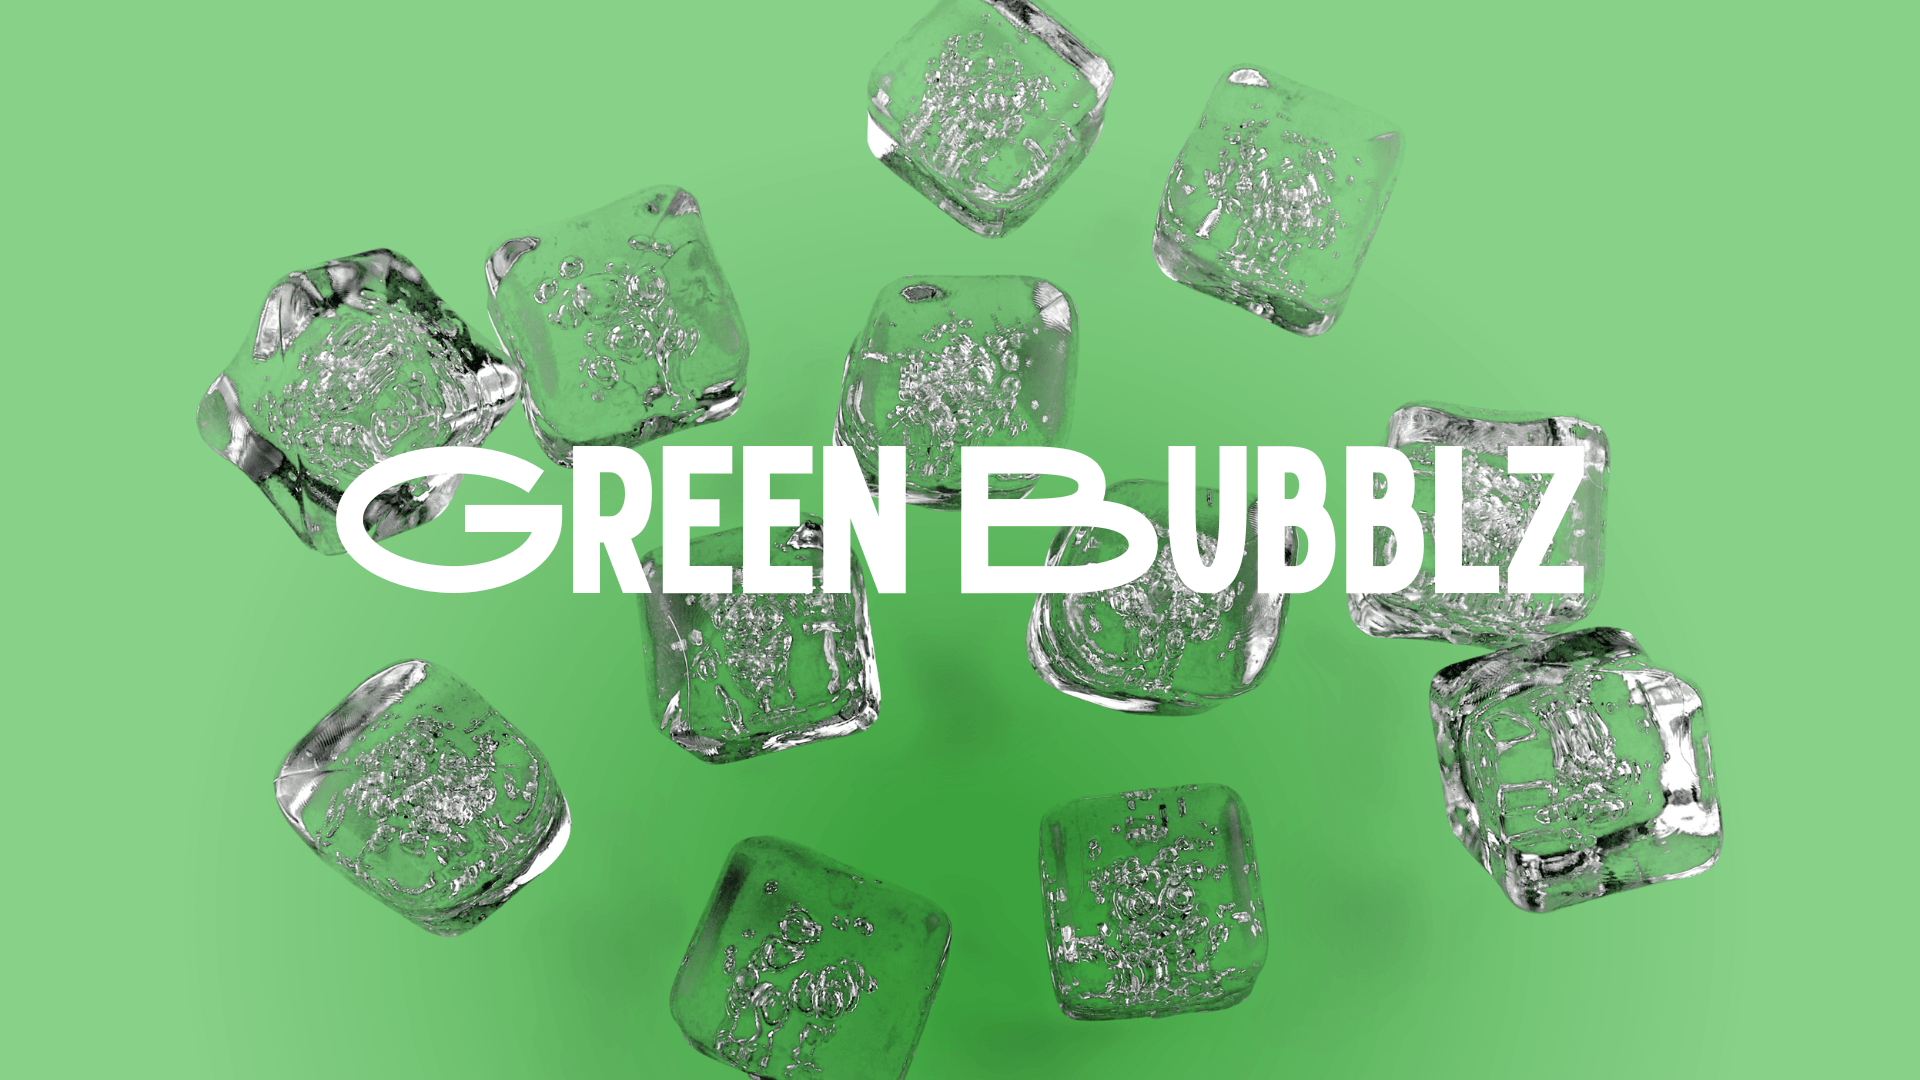 Green Bubblz brand identity and packaging